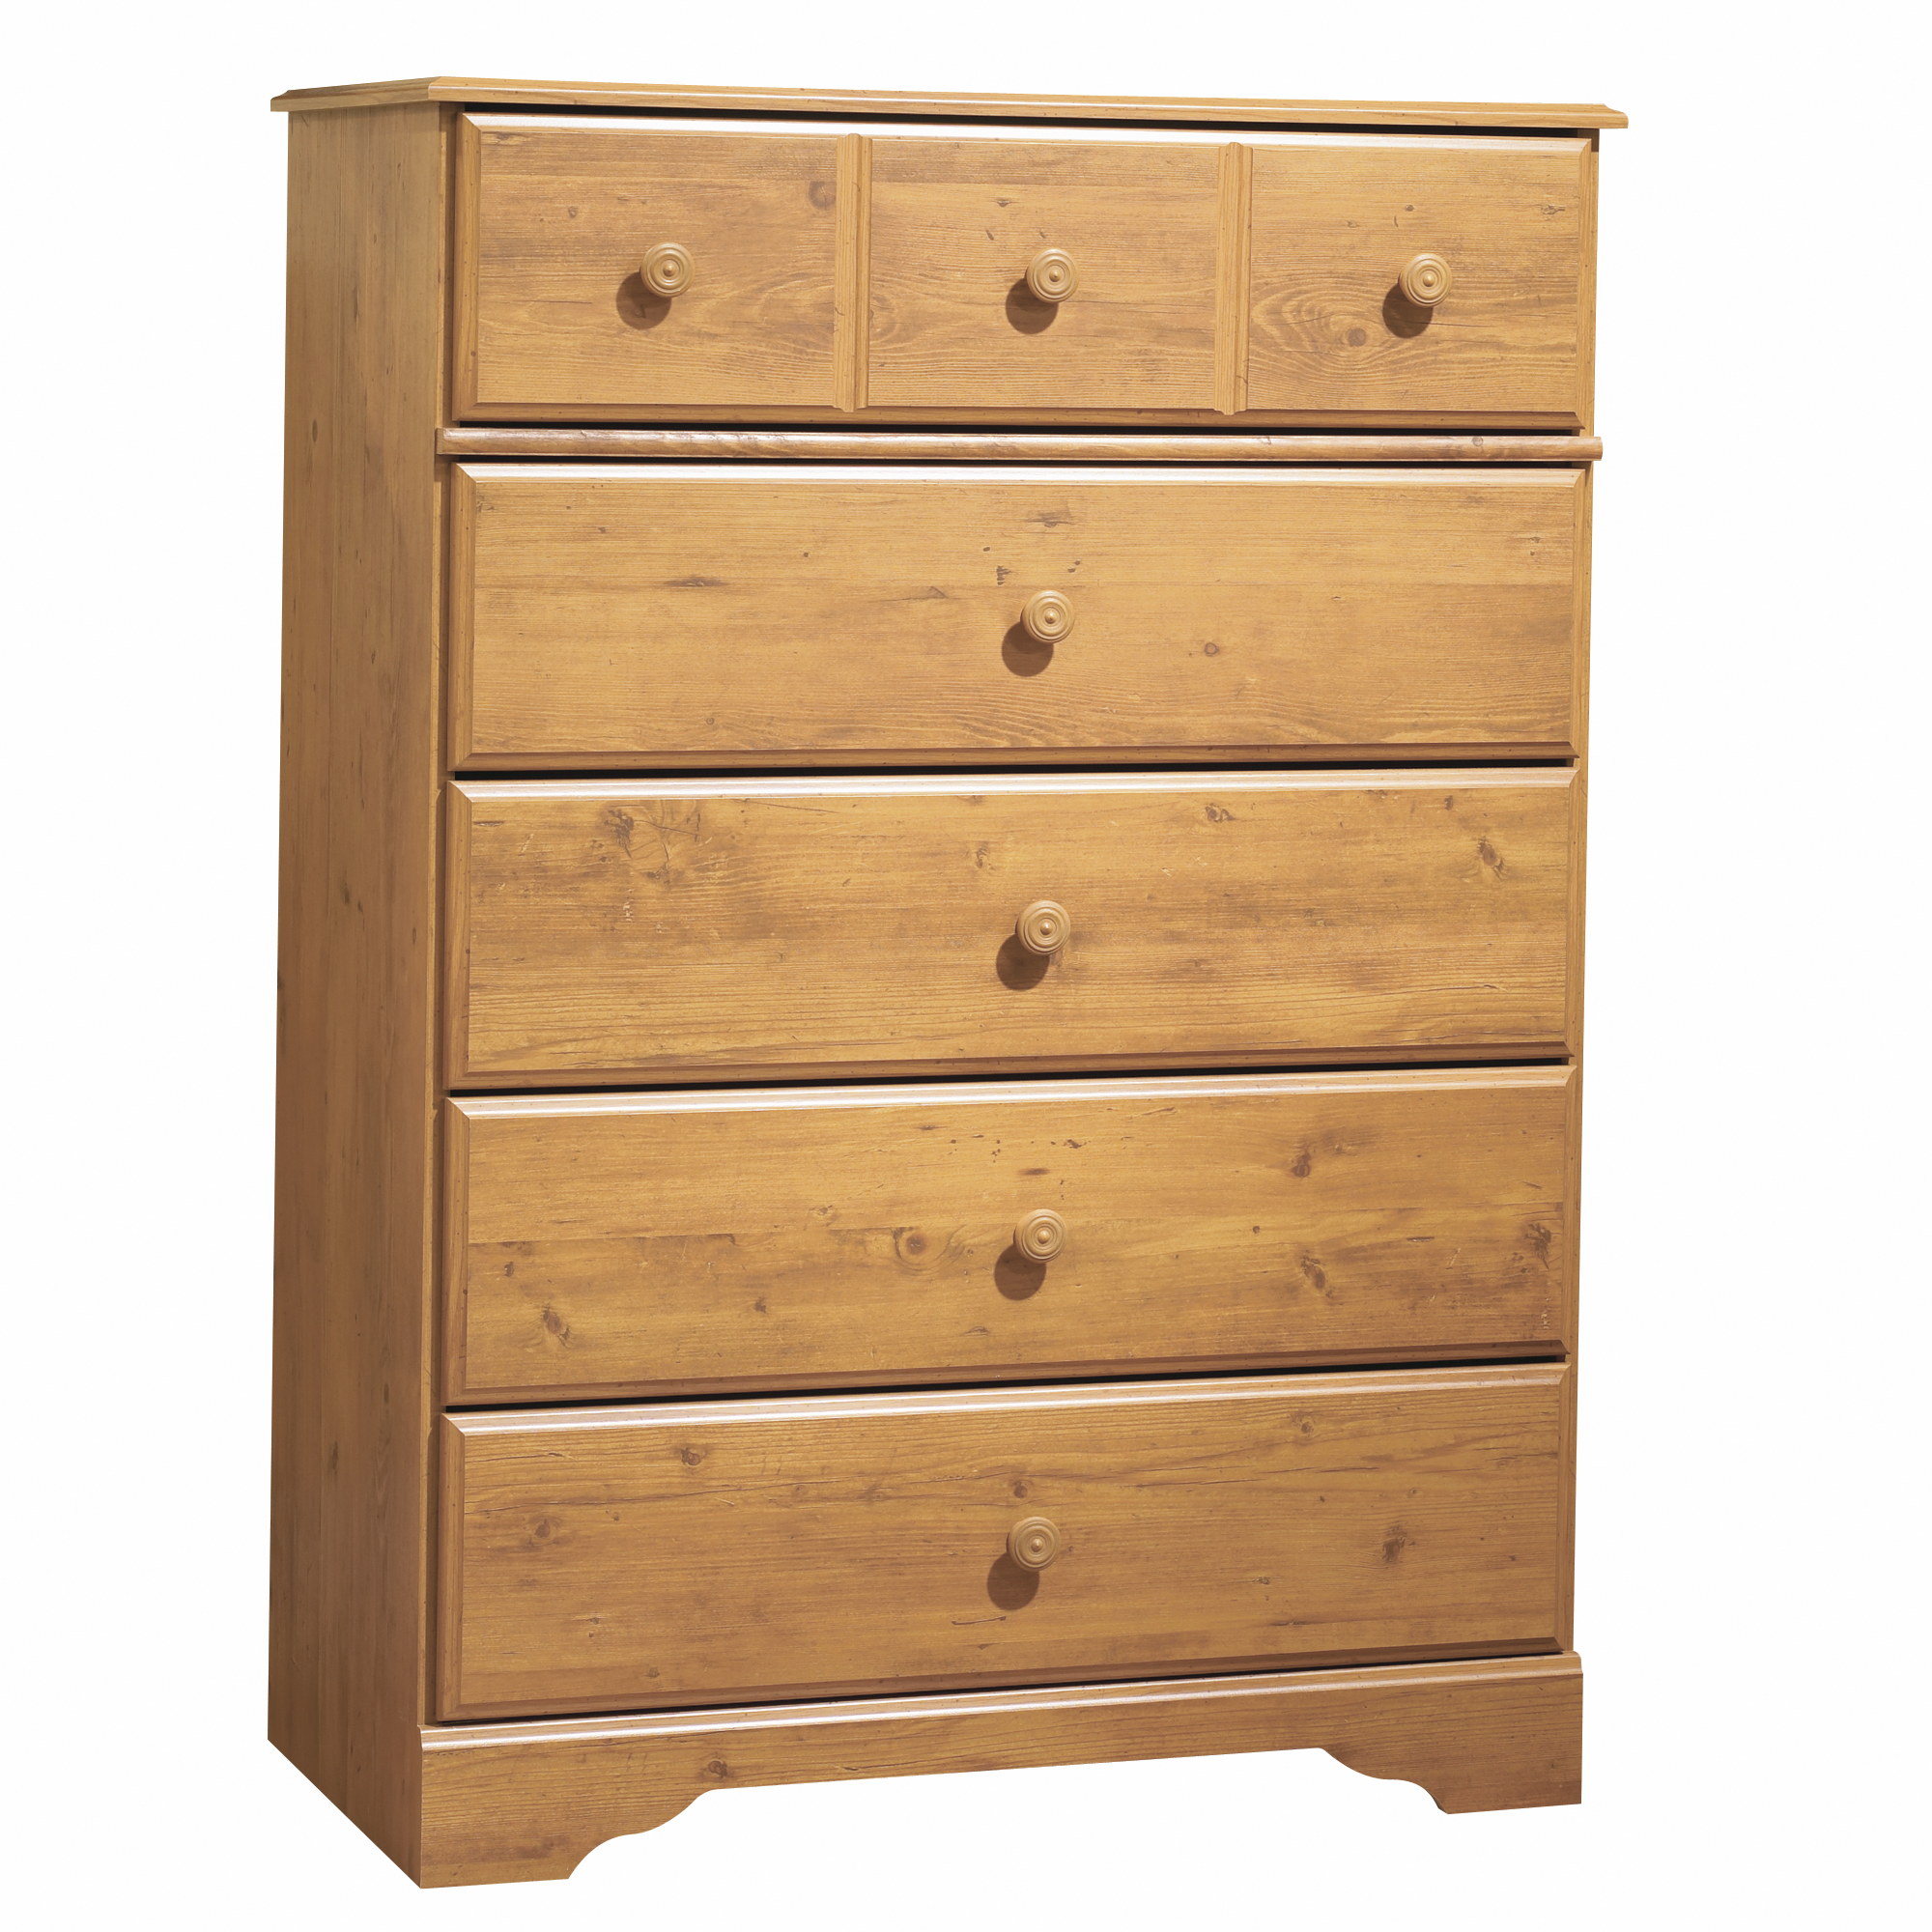 South Shore Little Treasures Kids' Dresser, 5 Drawers, Multiple Finishes - image 1 of 8